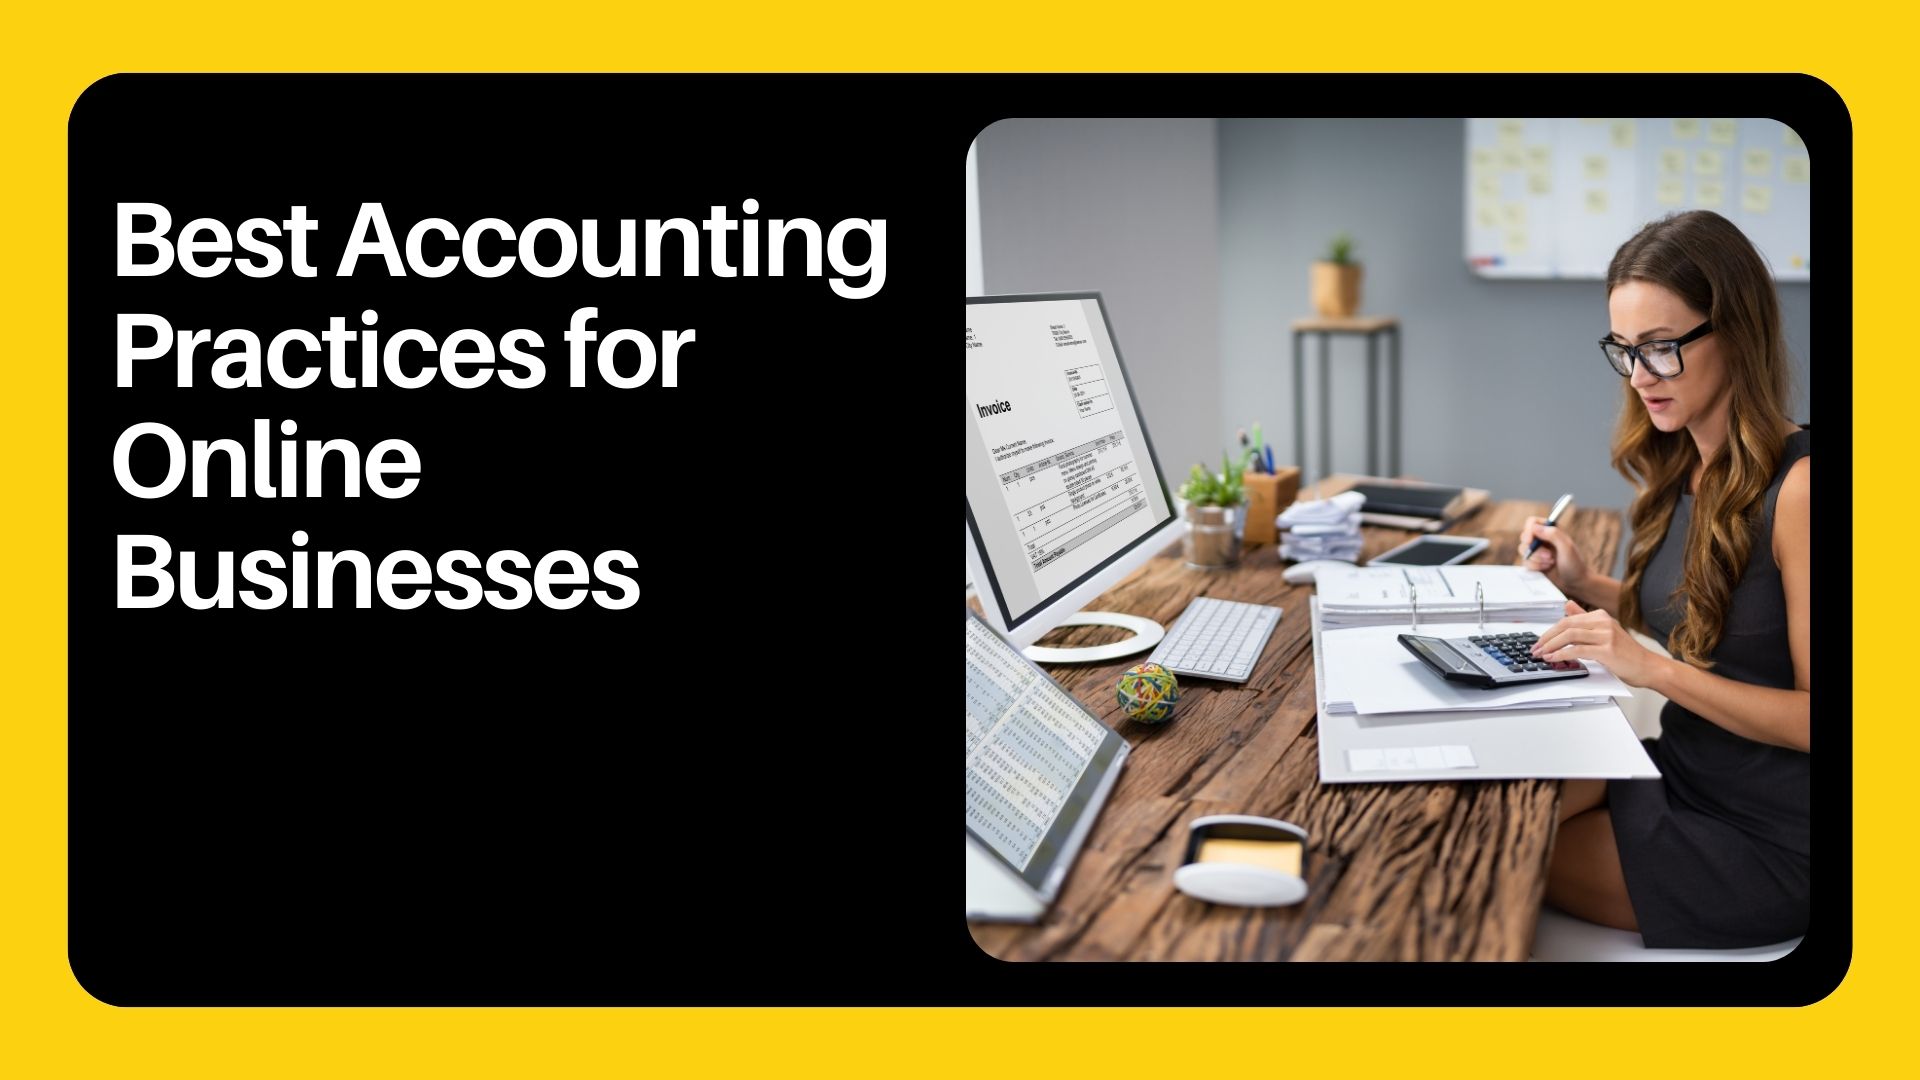 Best Accounting Practices for Online Businesses